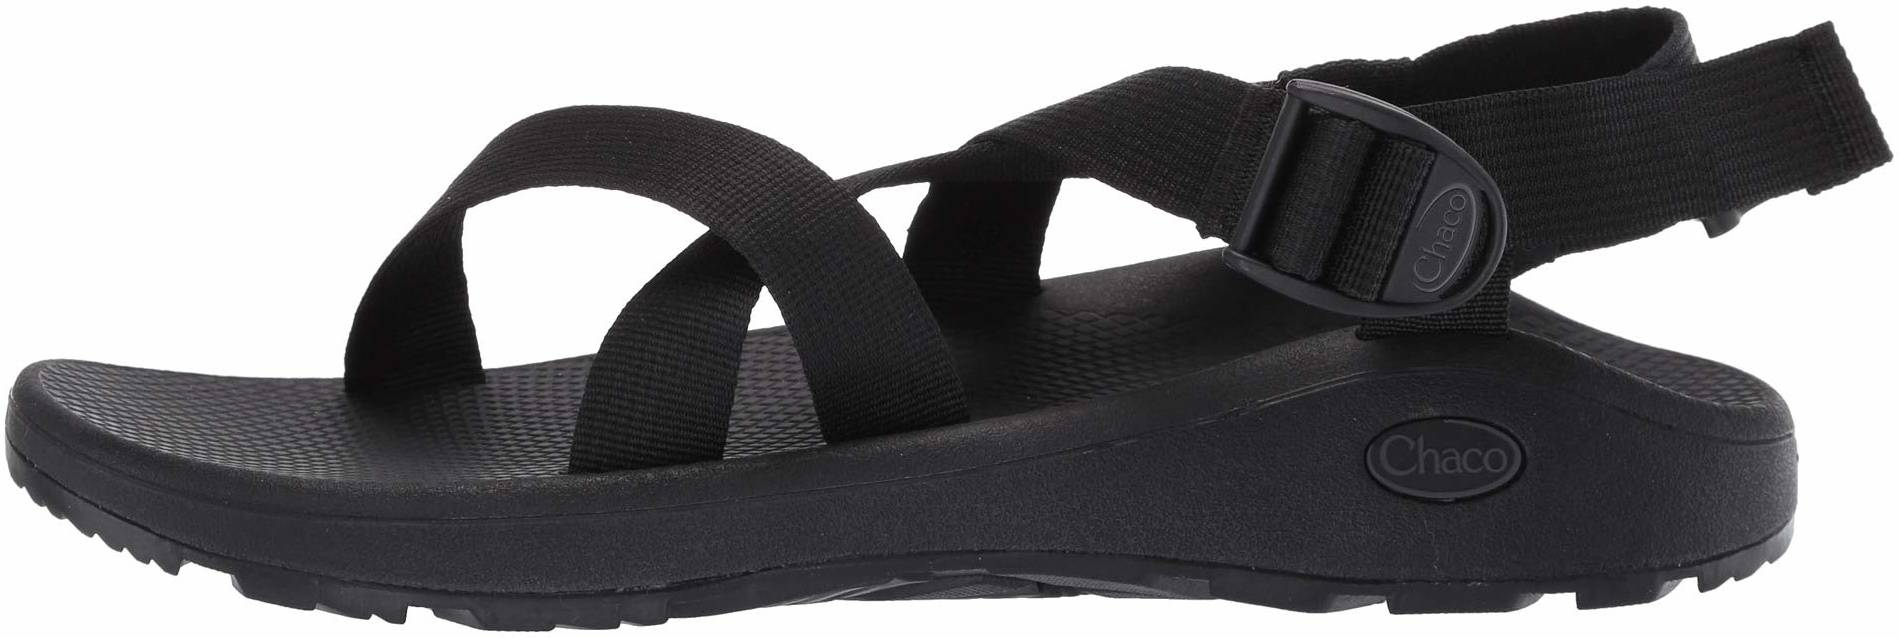 Save 59% on Chaco Hiking Sandals (13 